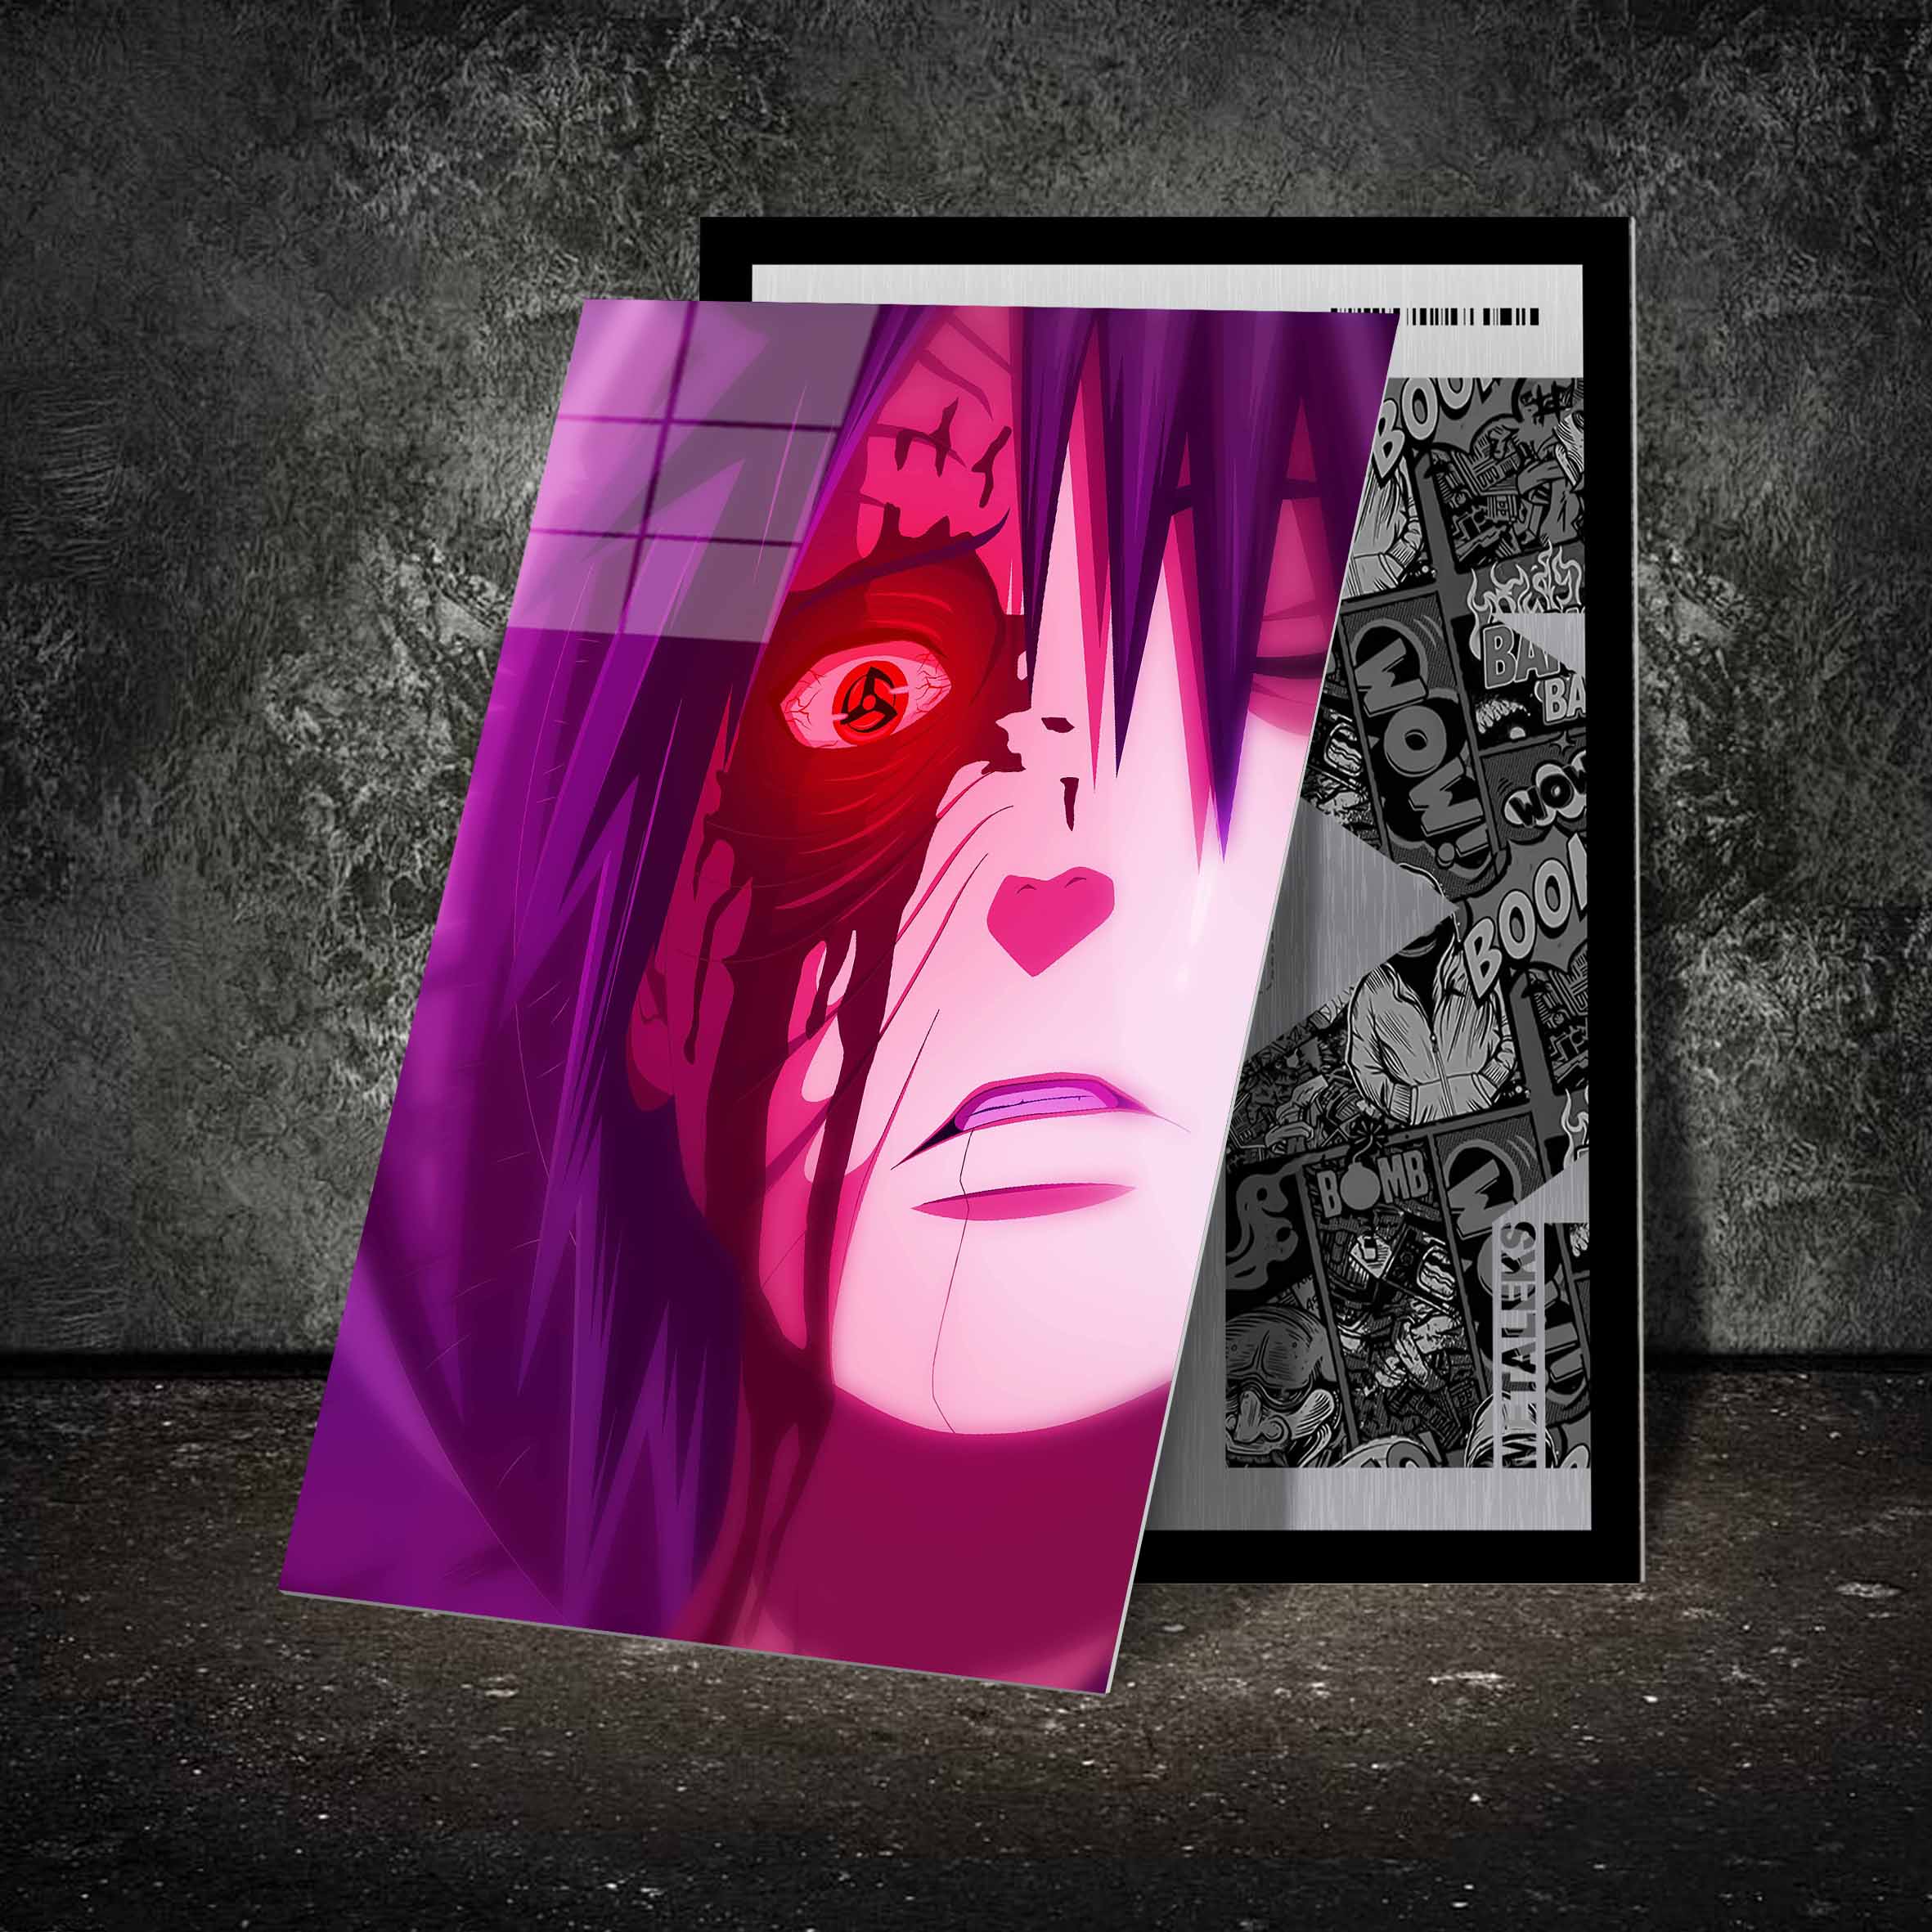 Obito Uchiha mangekyou-Artwork by @Inspire Collection